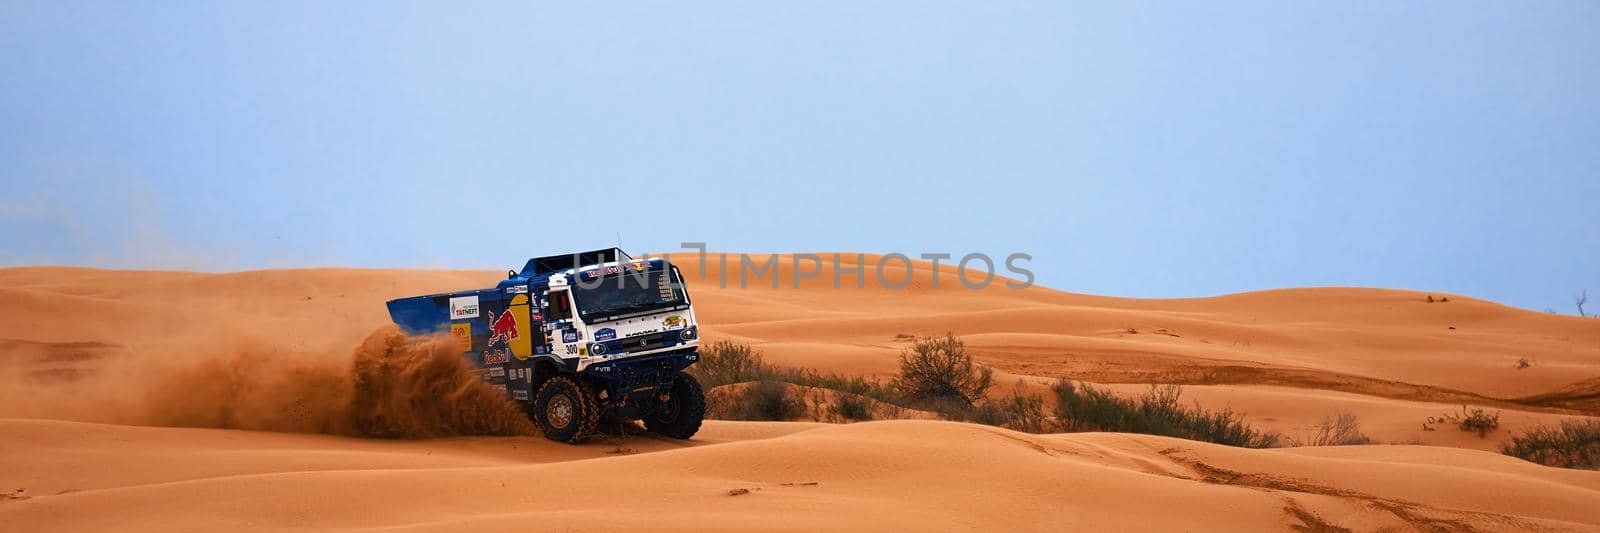 Sports truck KAMAZ gets over the difficult part of the route during the Rally raid in sand. THE GOLD OF KAGAN-2021. 26.04.2021 Astrakhan, Russia.